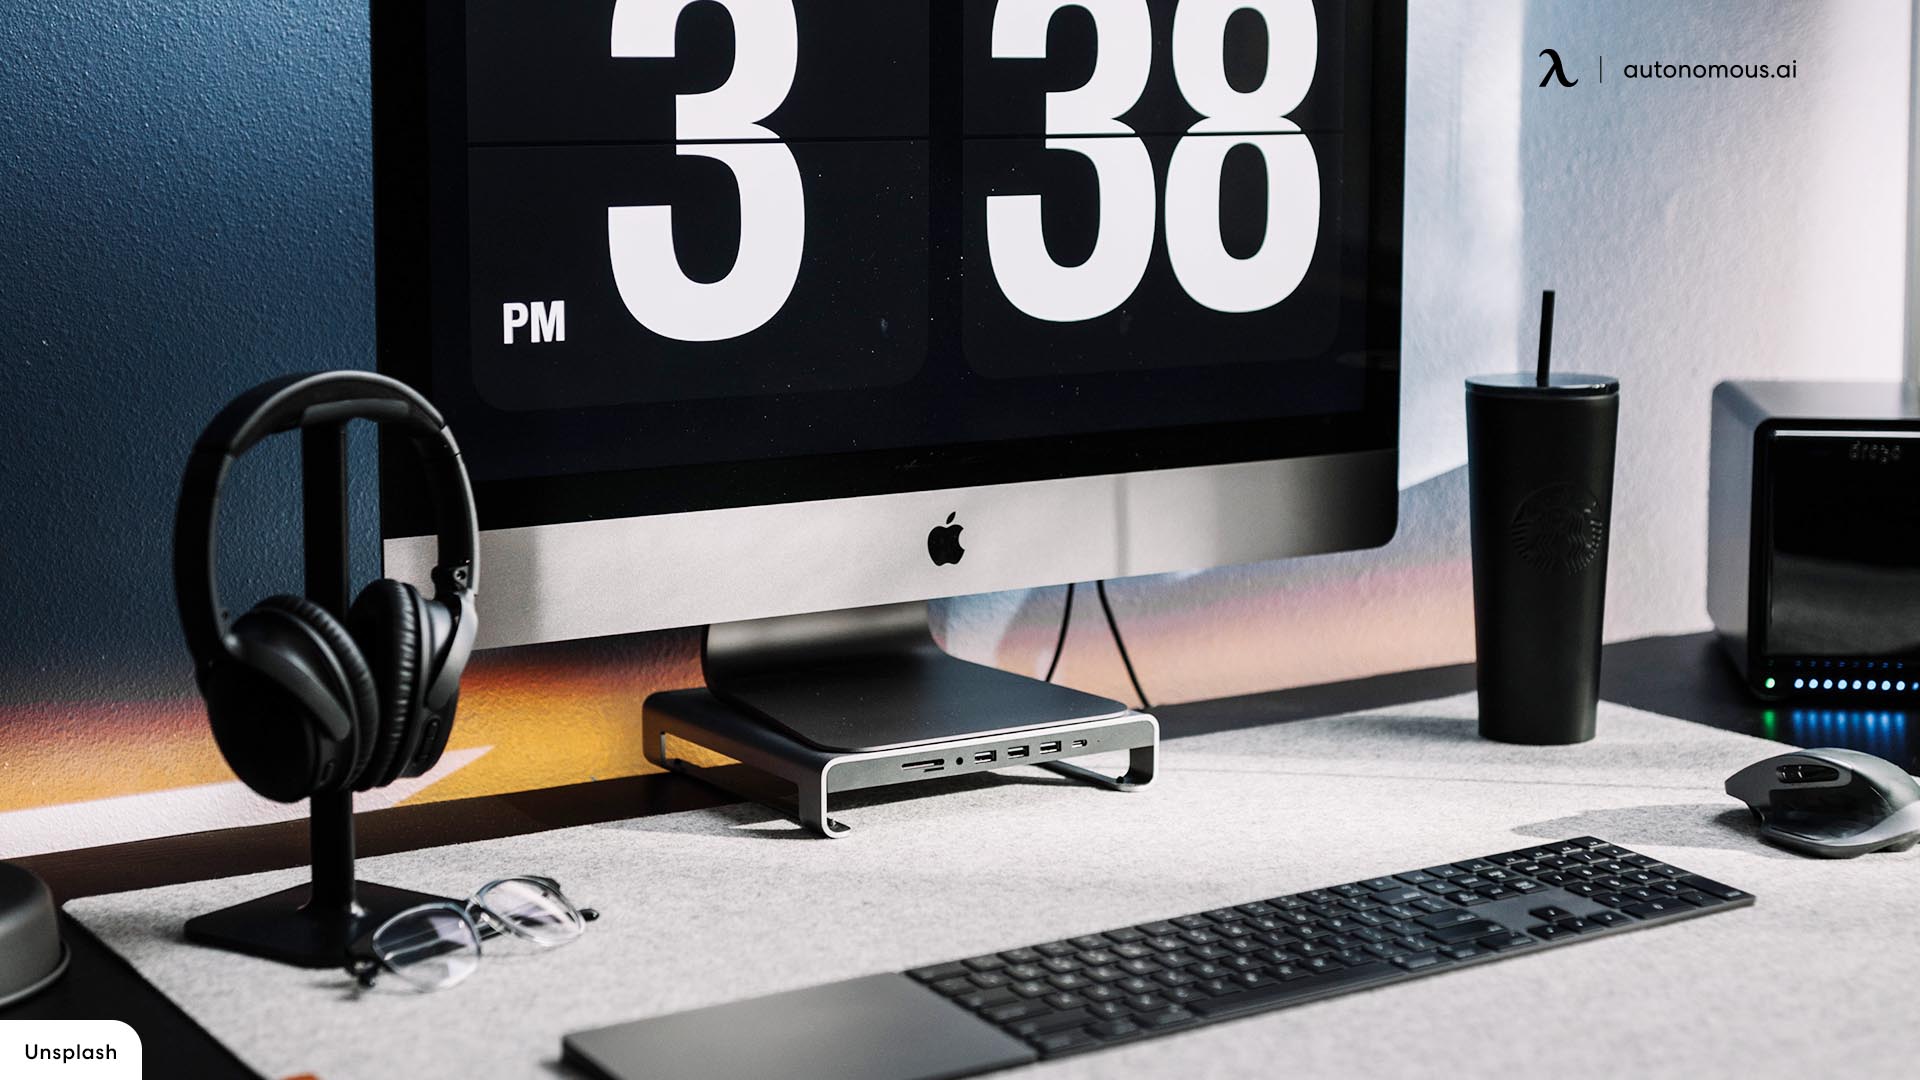 14 Desk Accessories for Men That are Cool & Expensive Looking